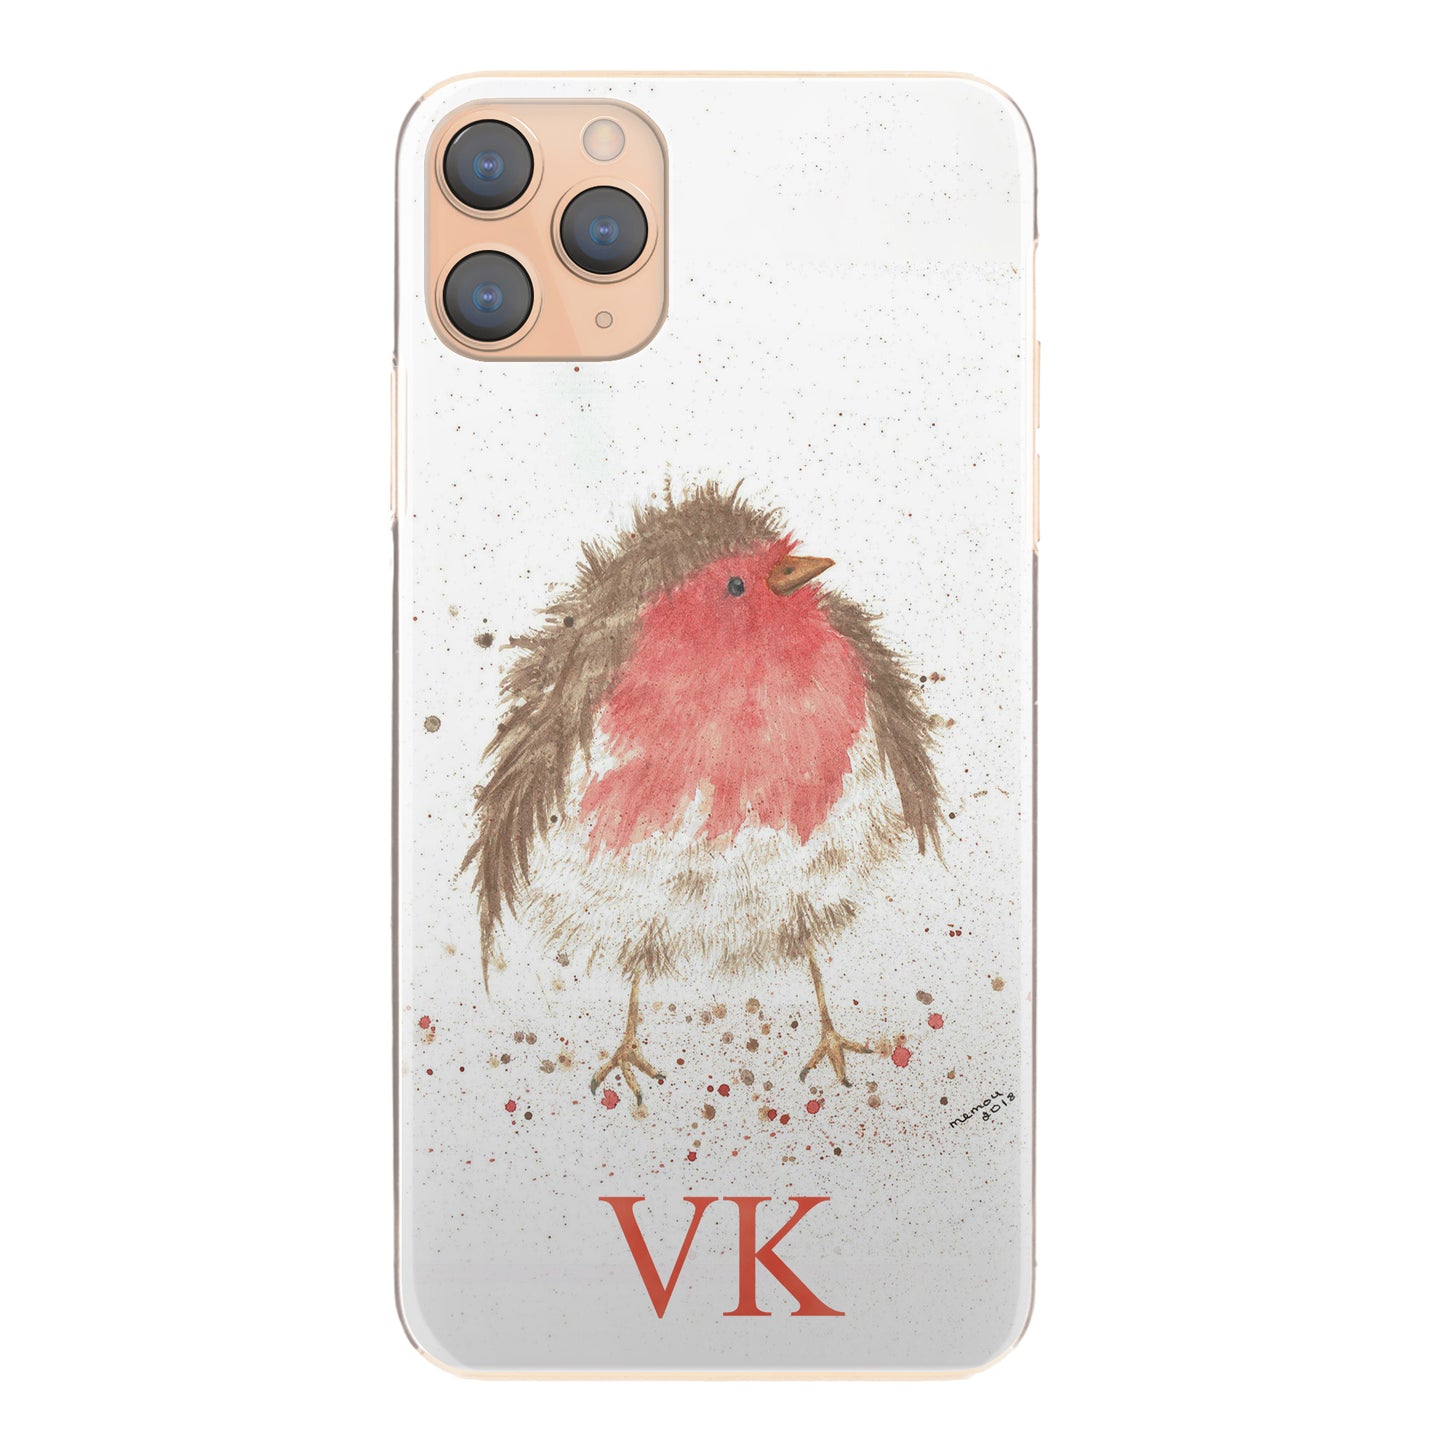 Personalised Samsung Galaxy Phone Hard Case with Speckled Robin and Red Initials